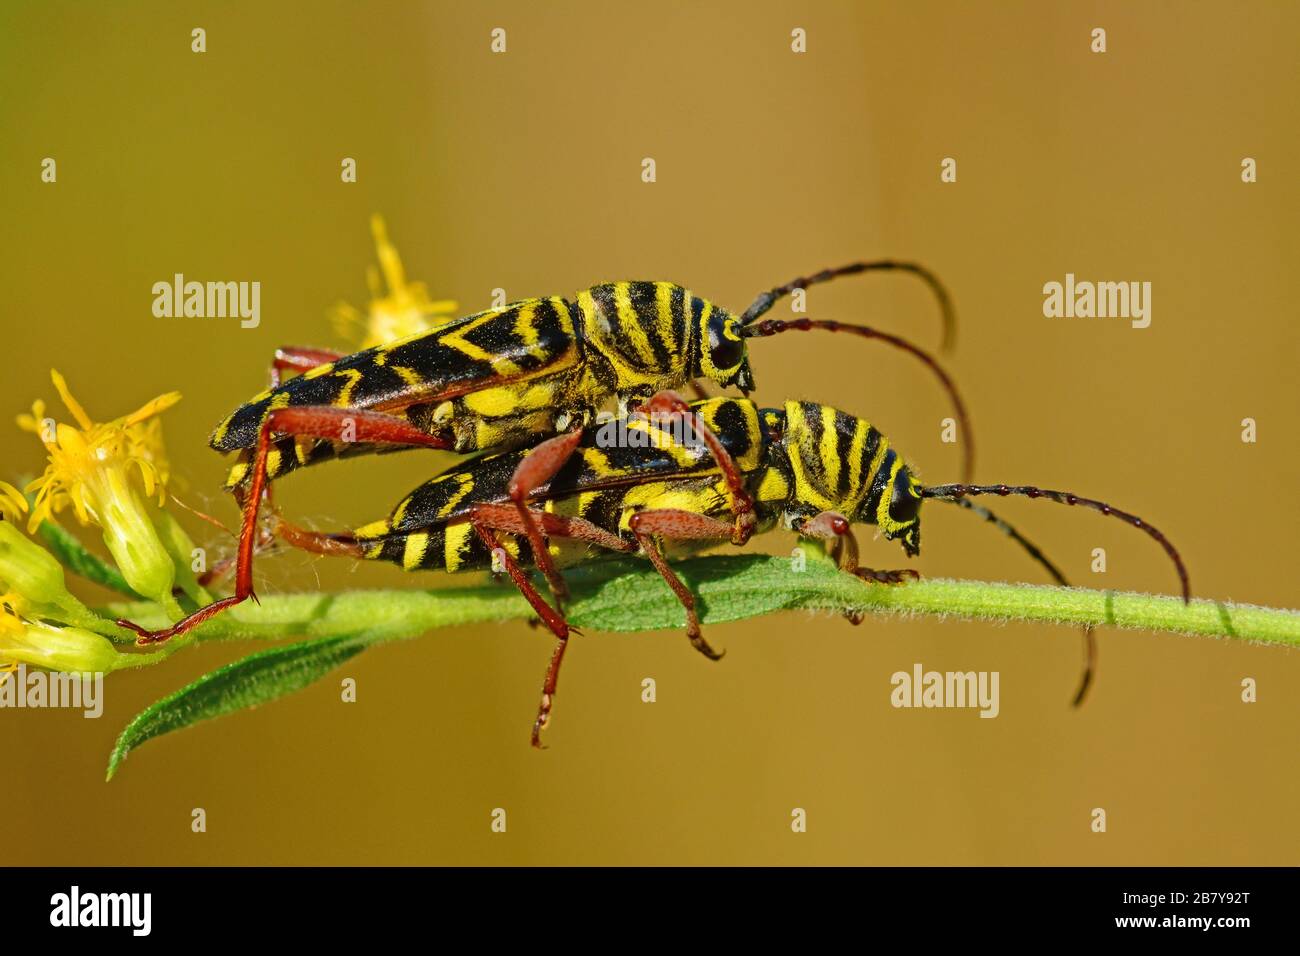 Horned beetles mating, Ontario, Canada Stock Photo